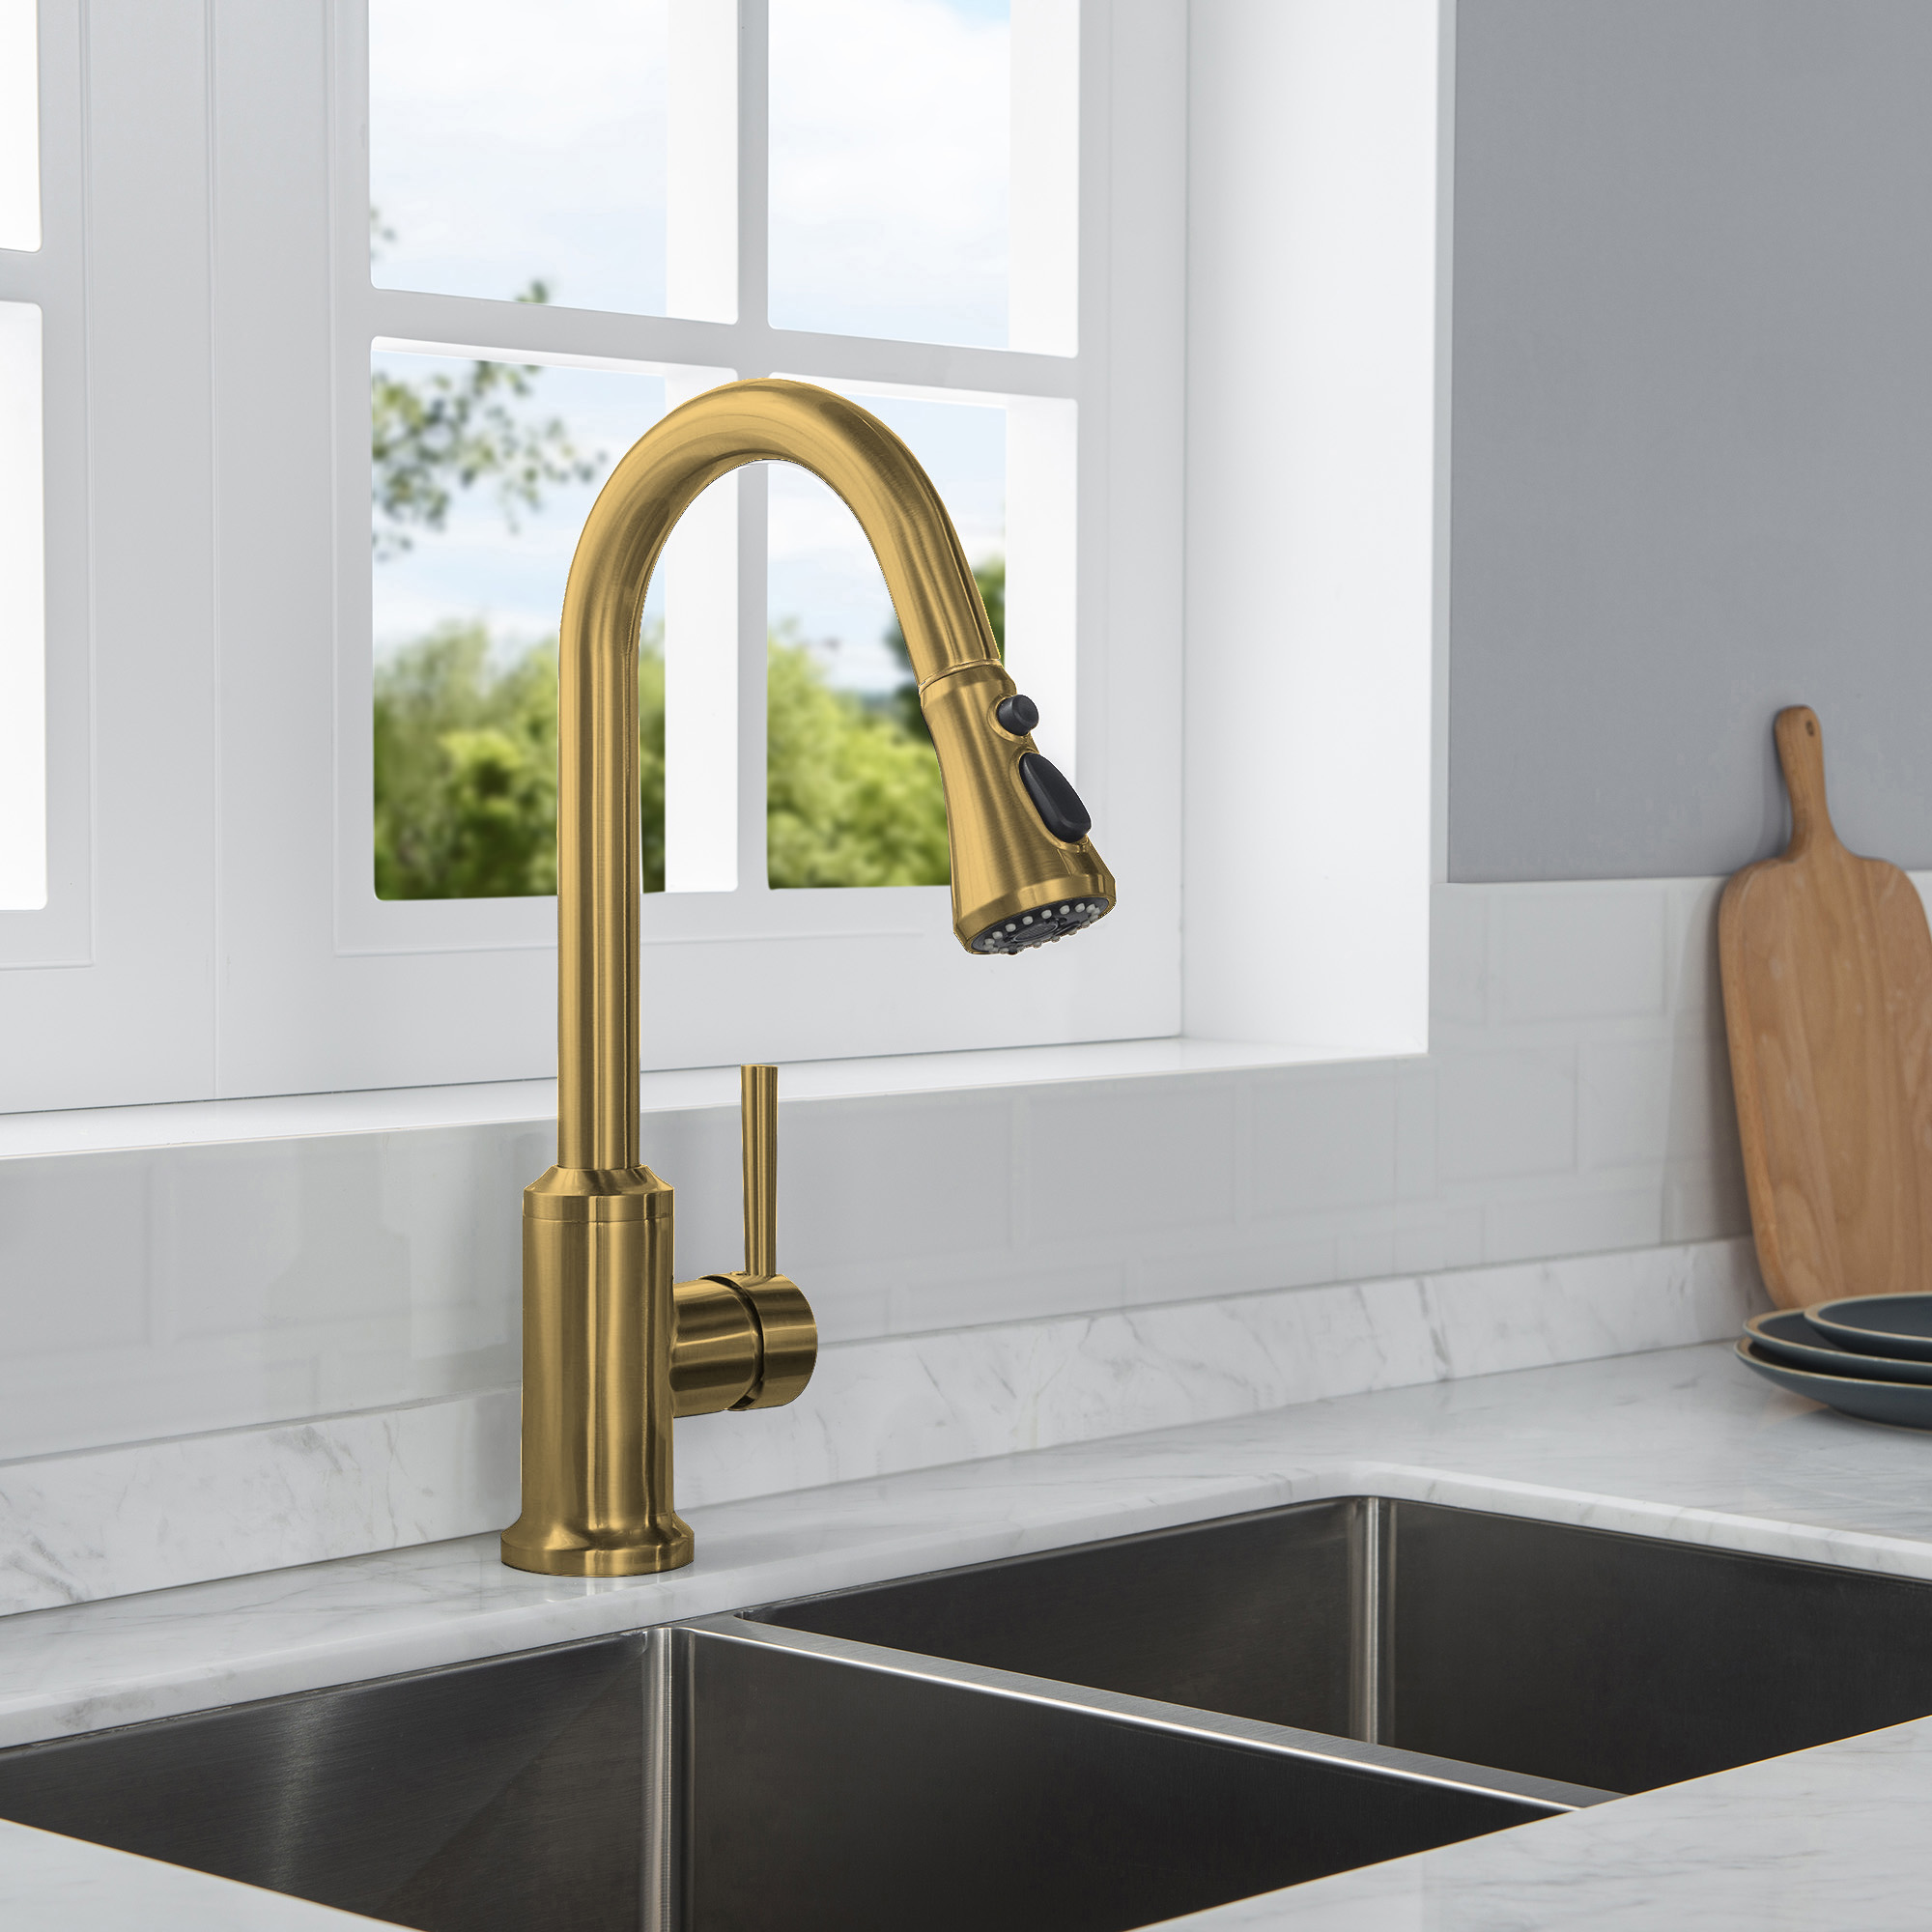 WOODBRIDGE WK101201BG Stainless Steel Single Handle Pull Down Kitchen Faucet in Brushed Gold Finish.